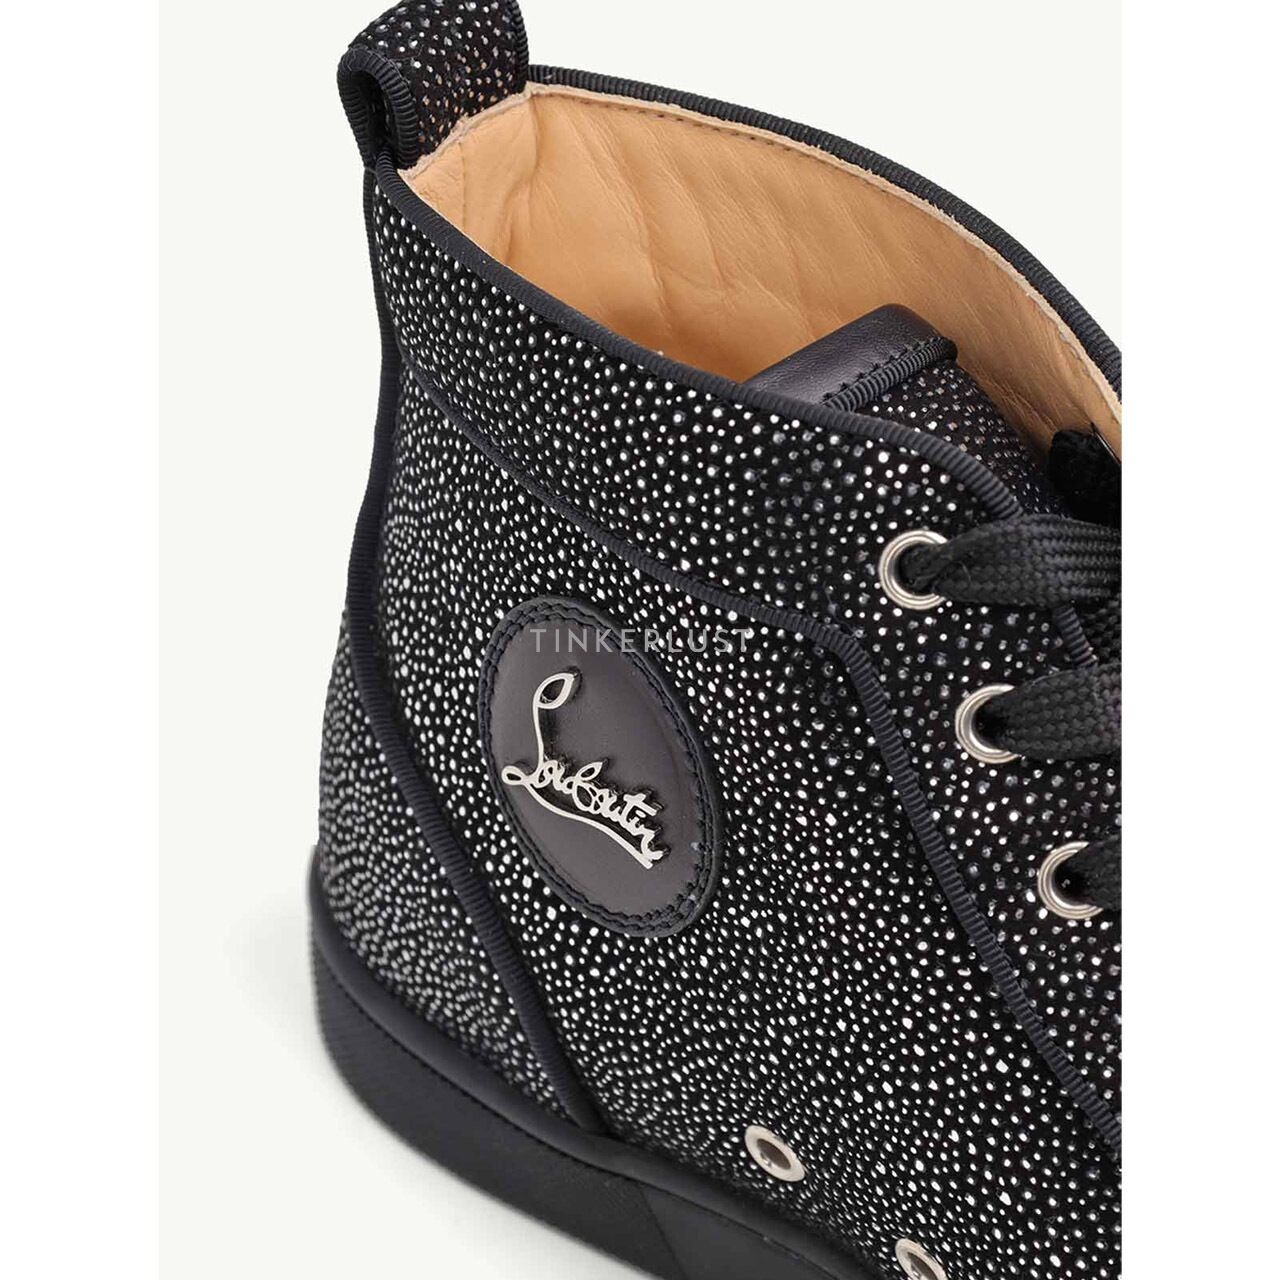 Christian Louboutin Men Lou Spikes Orlato High Top Sneakers in Version Black Creative Leather